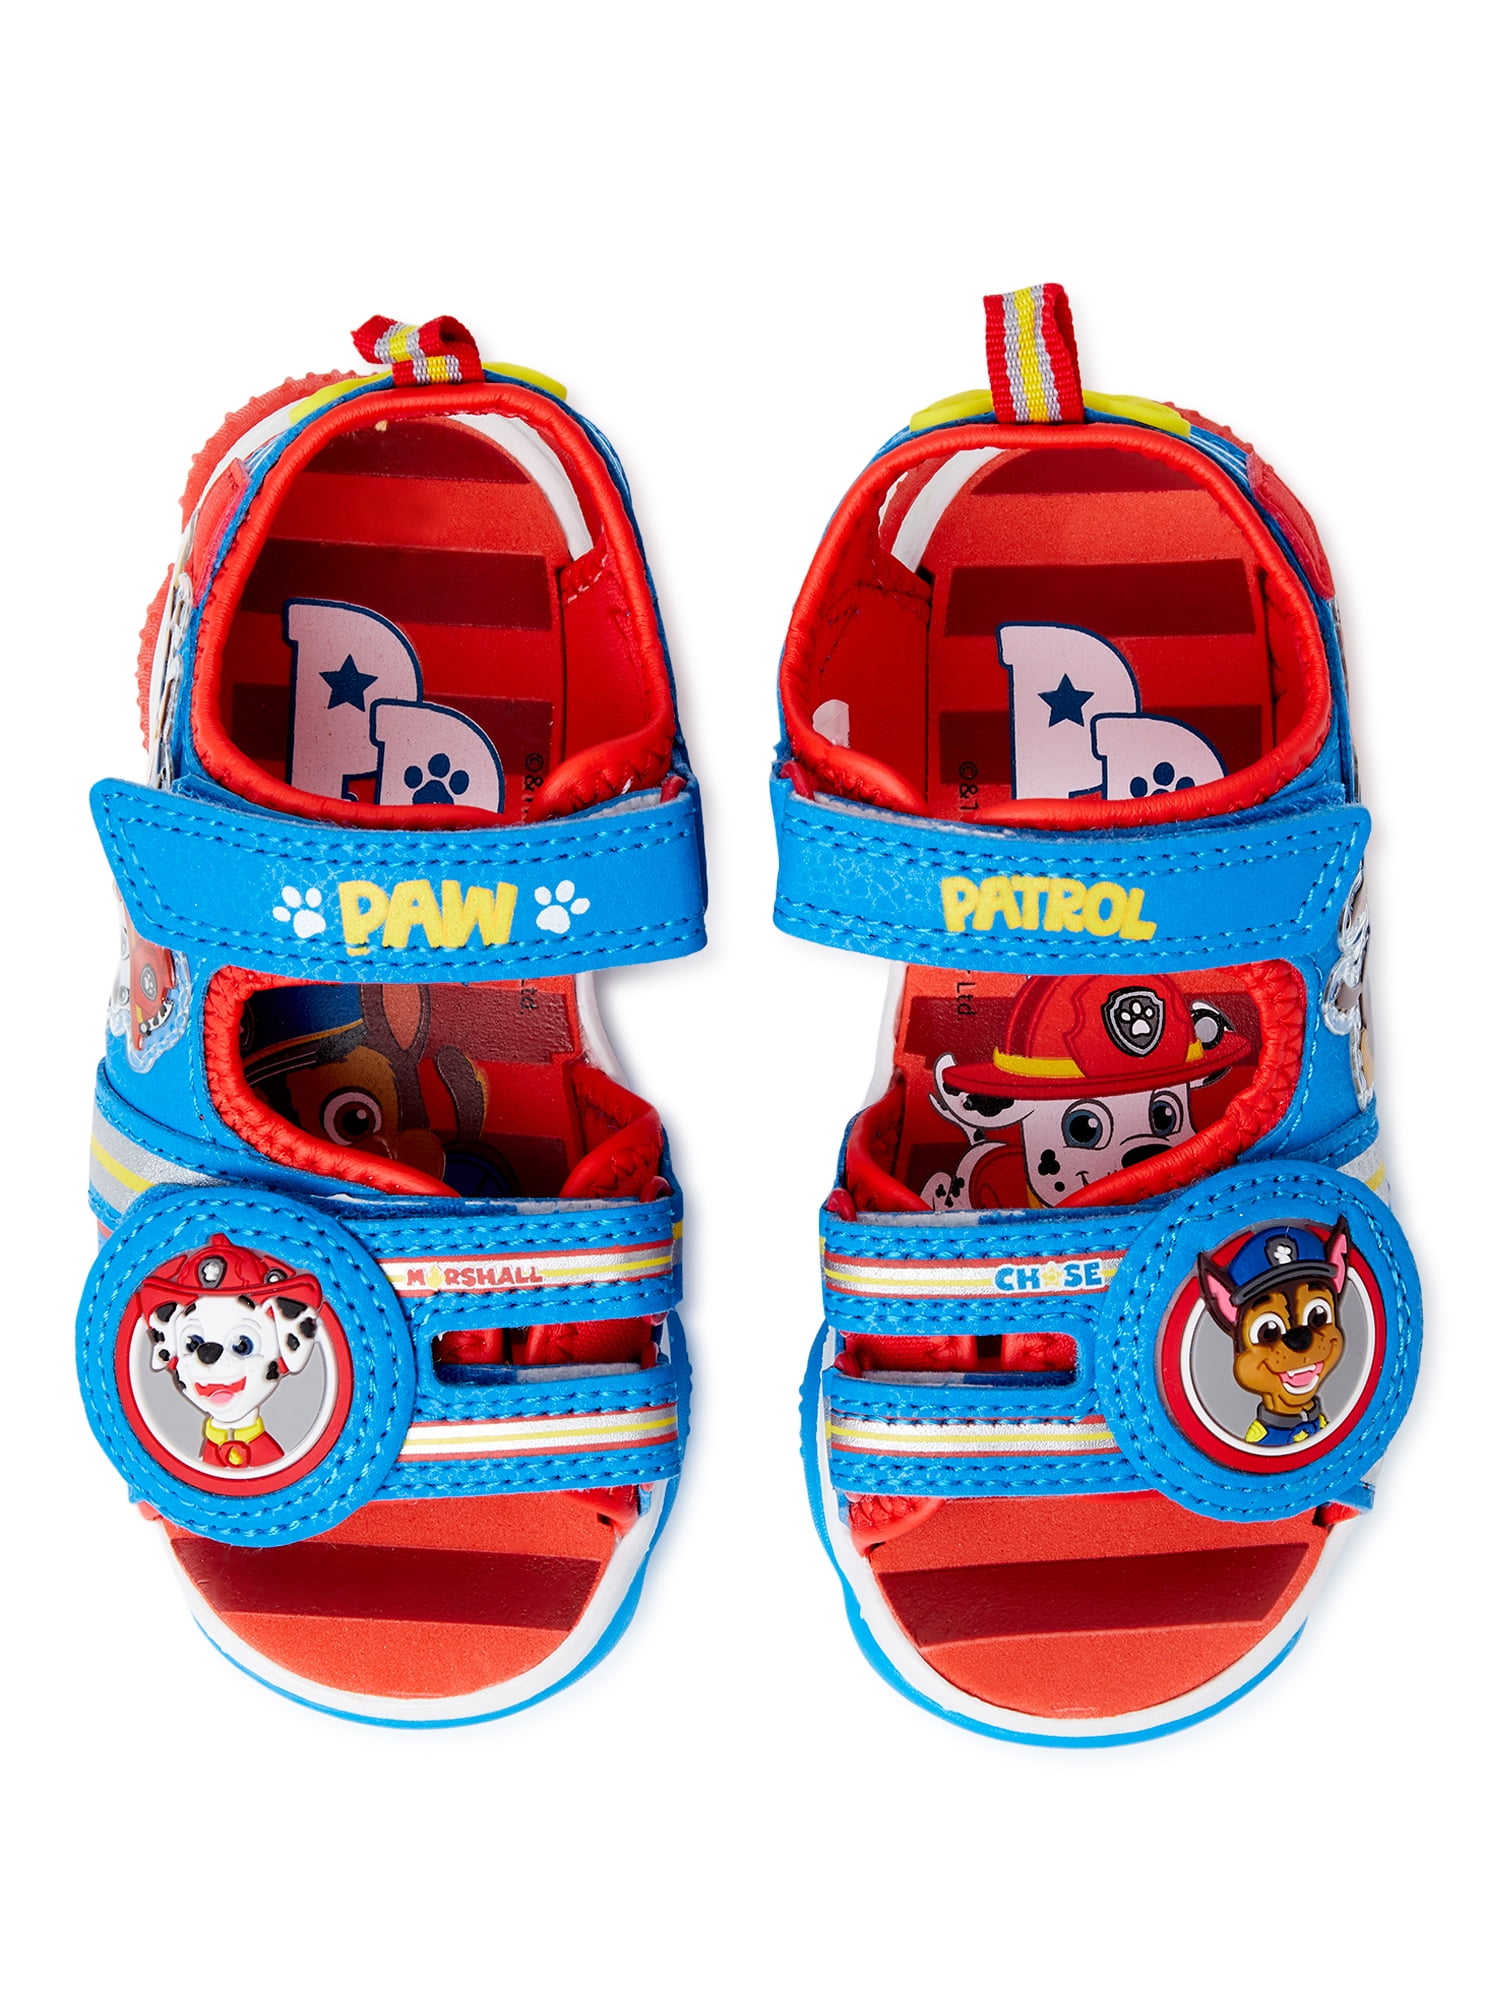 New Toddler Boys Paw Patrol Chase & Marshall Light-Up Sandals 6 7 8 9 10 11 12 